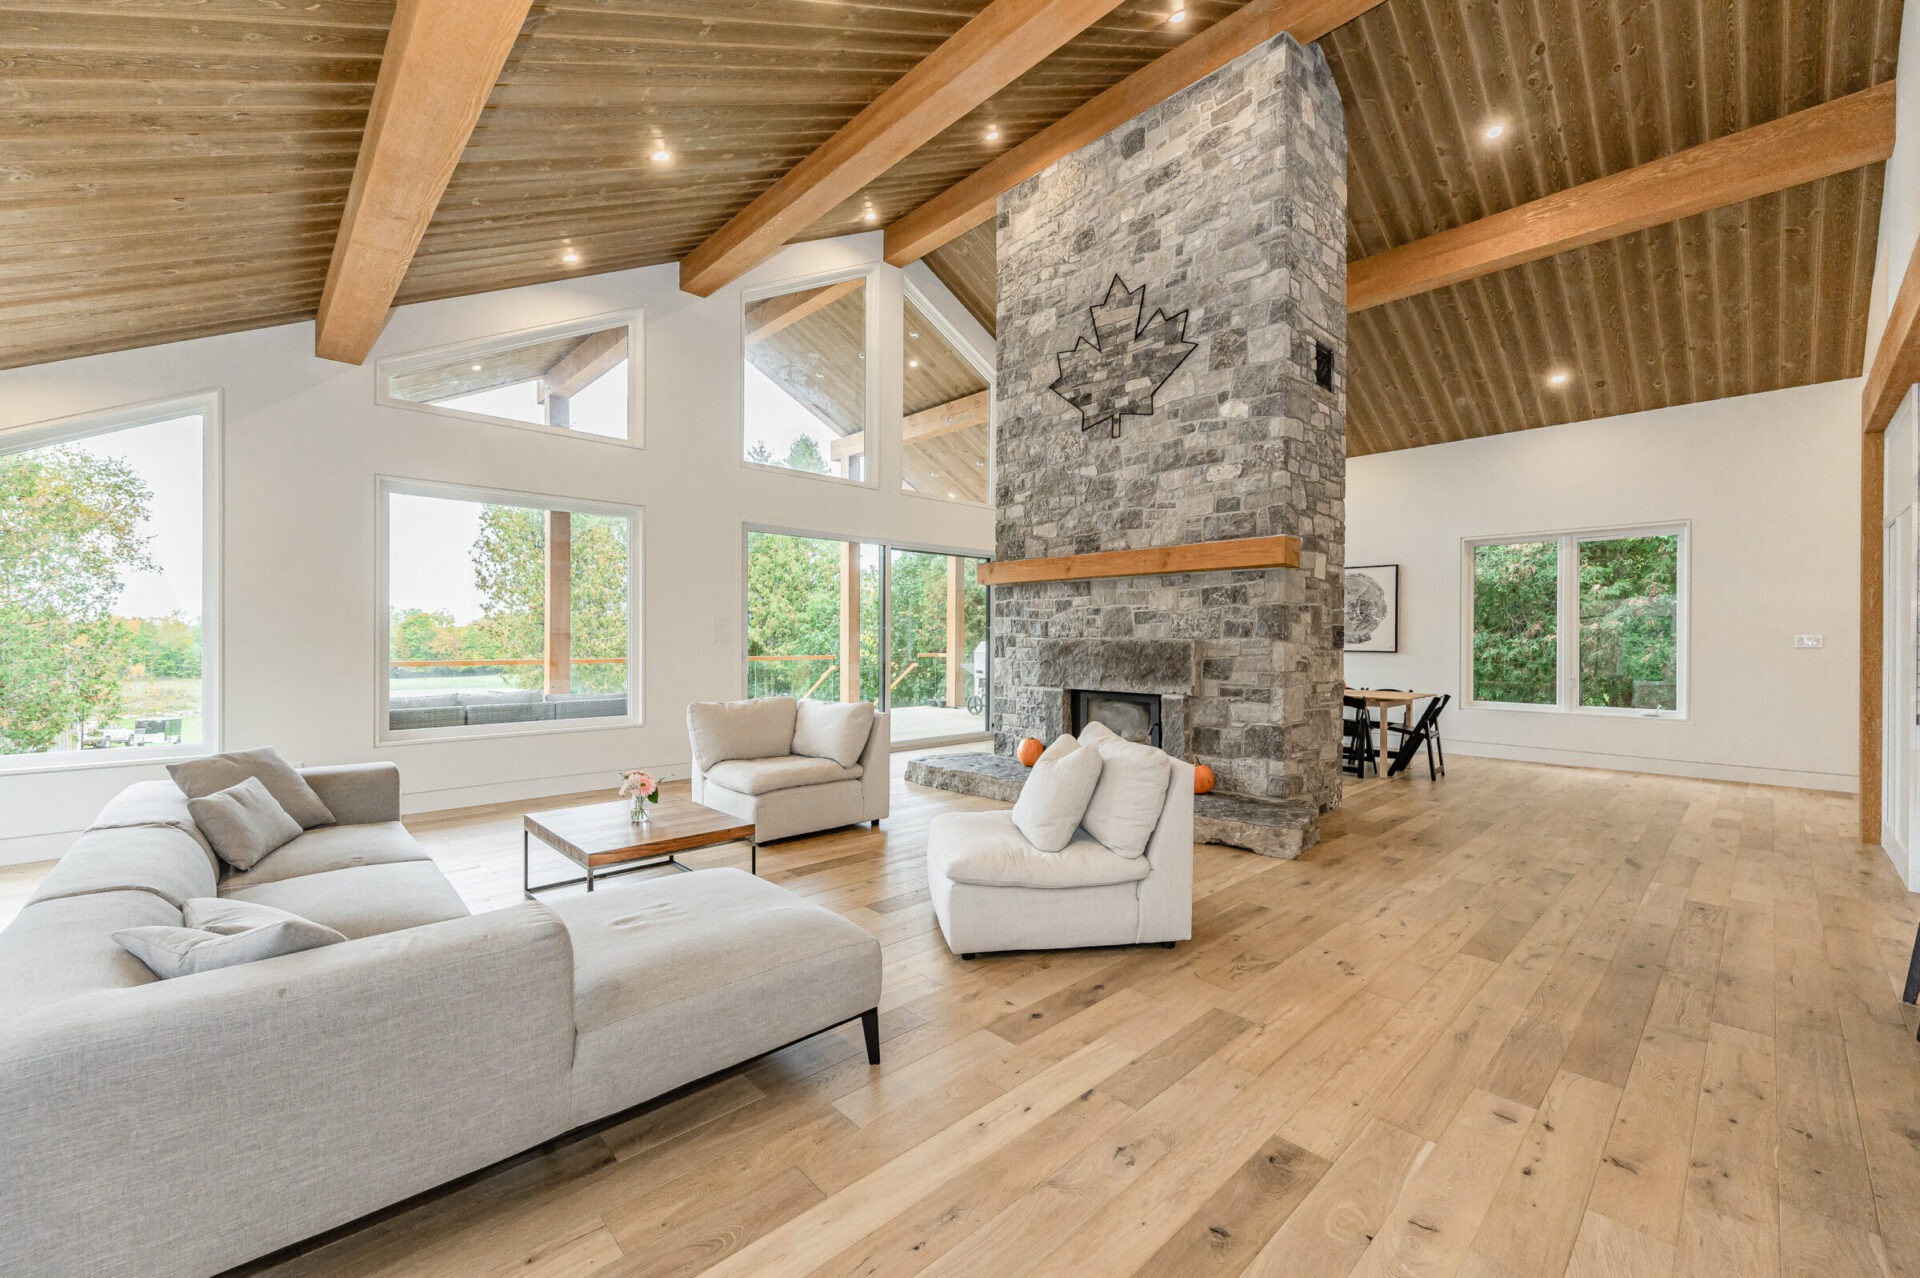 A spacious living room with high ceilings, exposed wooden beams, large windows, a stone fireplace, and minimalist furniture. It looks modern and airy.